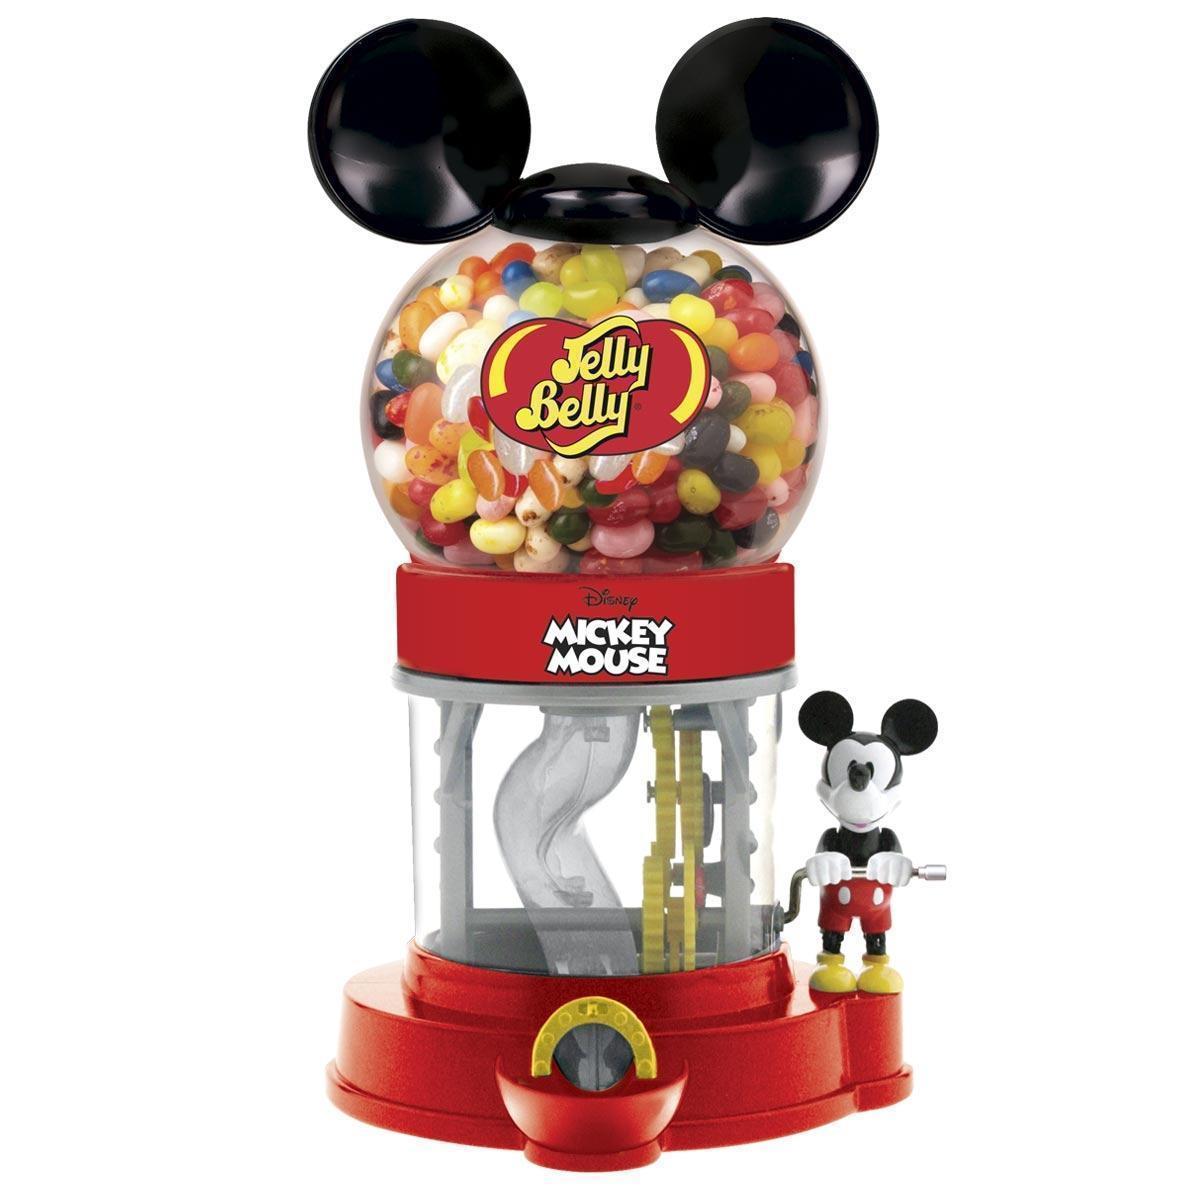 Disney Mickey Mouse Jelly Belly Jelly Bean Dispenser Machine